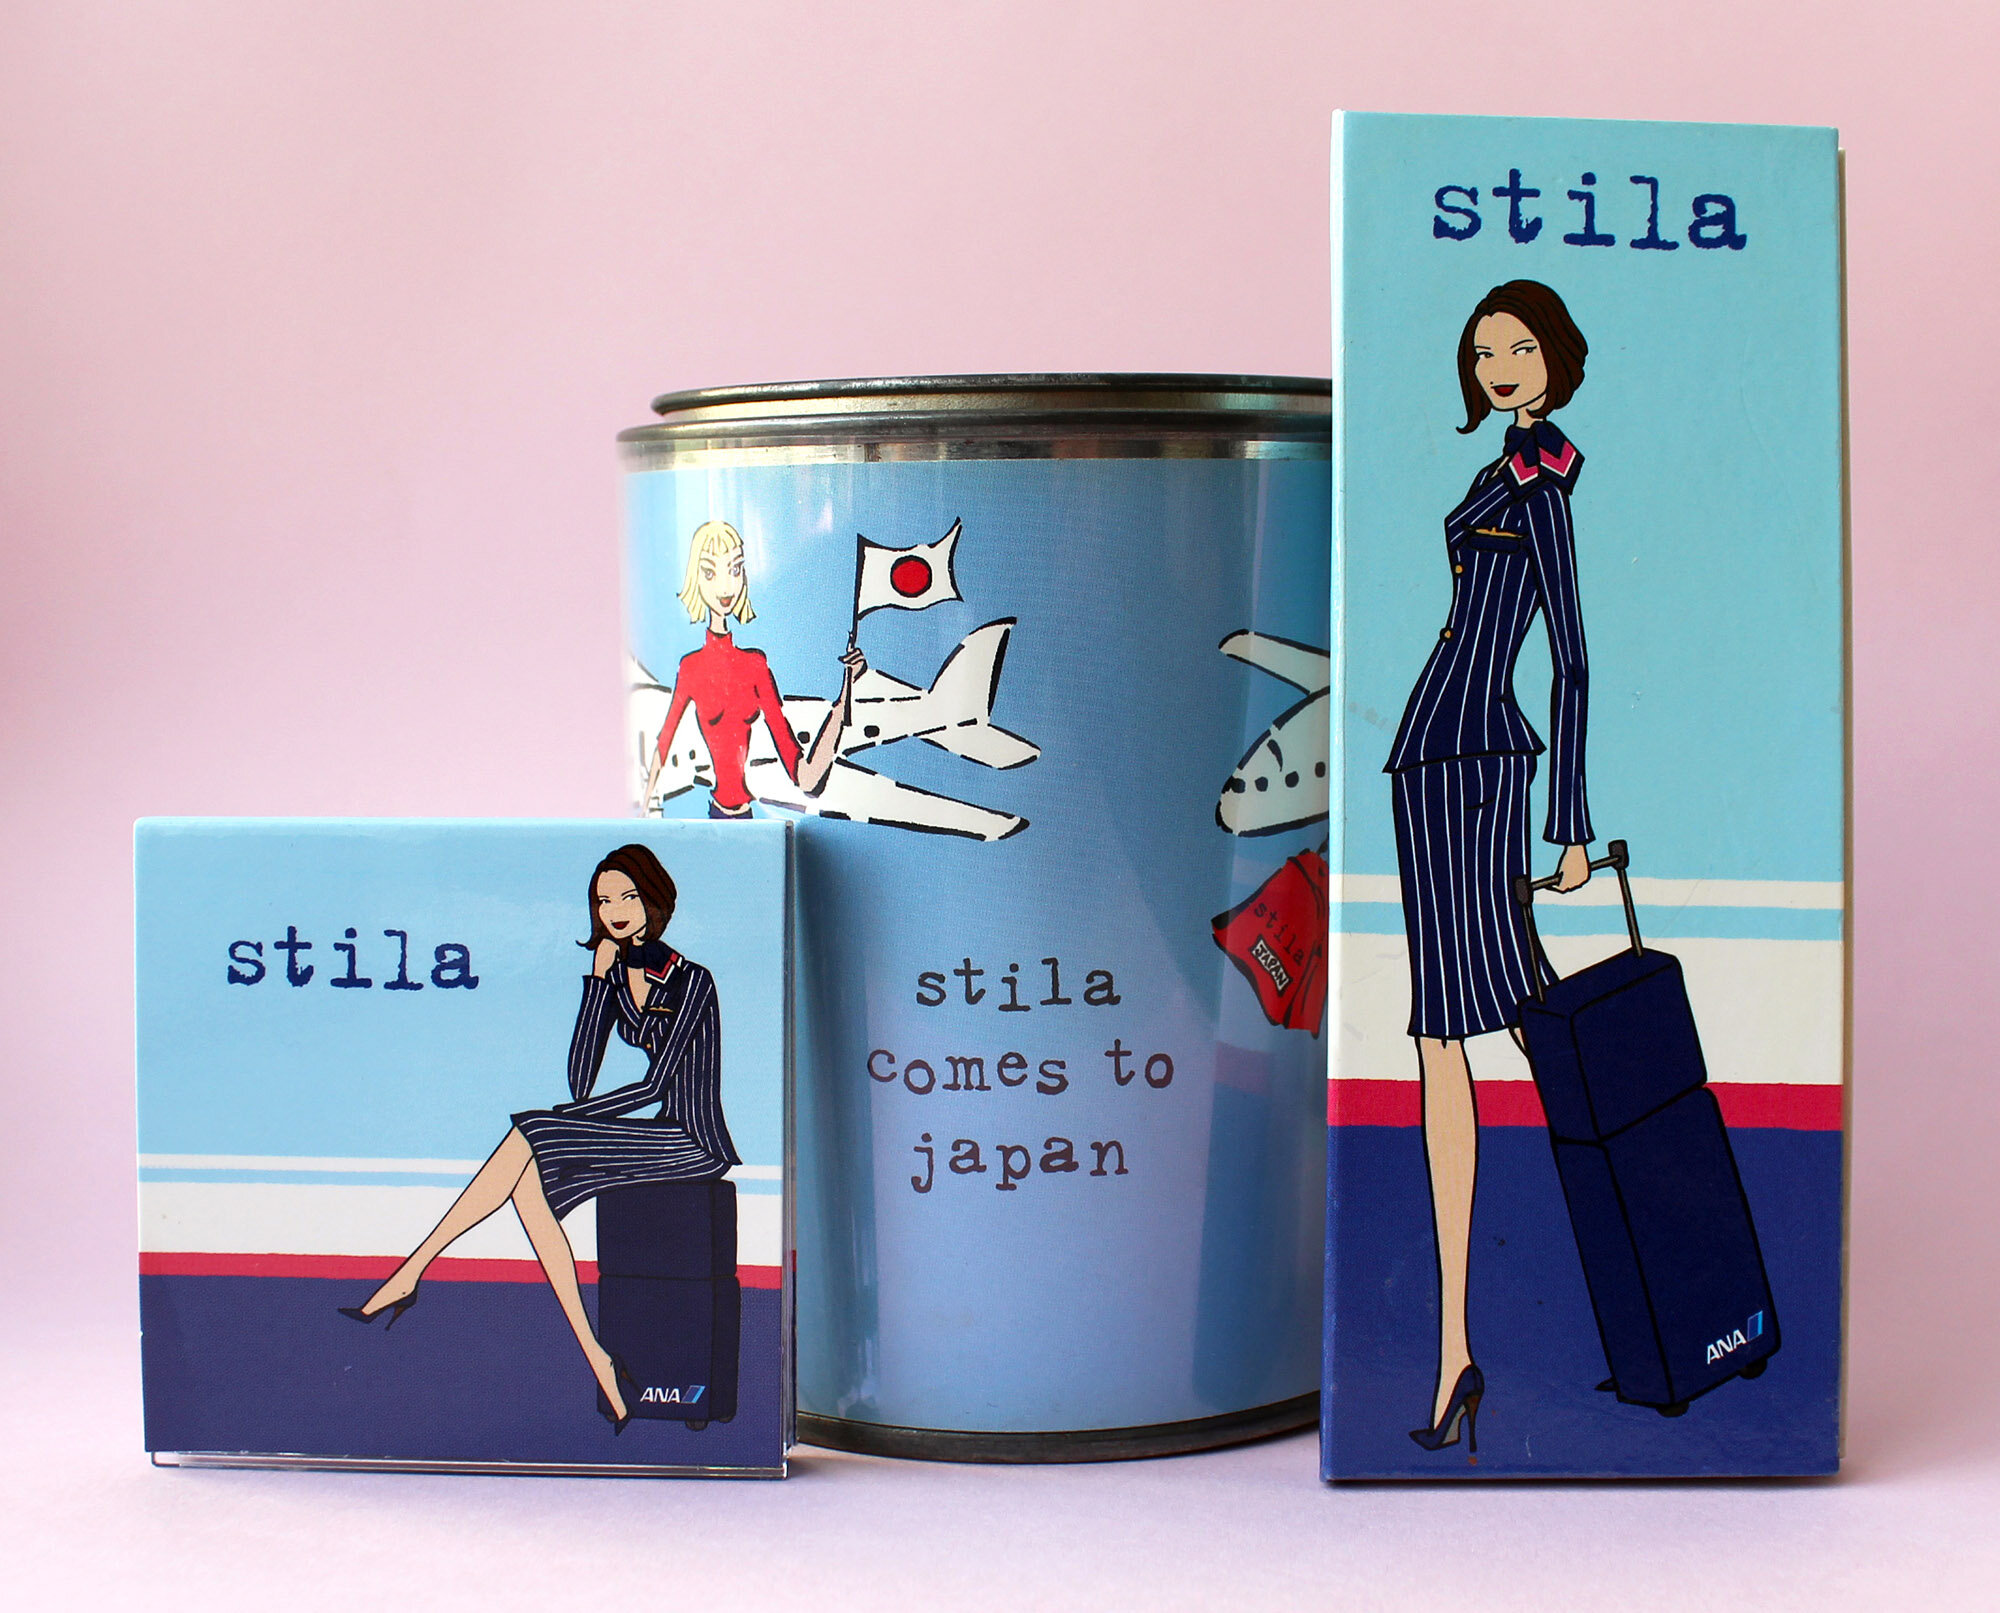   Lip Glaze and Eyeshadow Palettes Japan Paint Can  ca. 1999-2002  Stila collaborated with ANA airlines to create two products that were sold exclusively in duty-free shops in Asia.  The paint can commemorates Stila’s expansion in the Japanese market